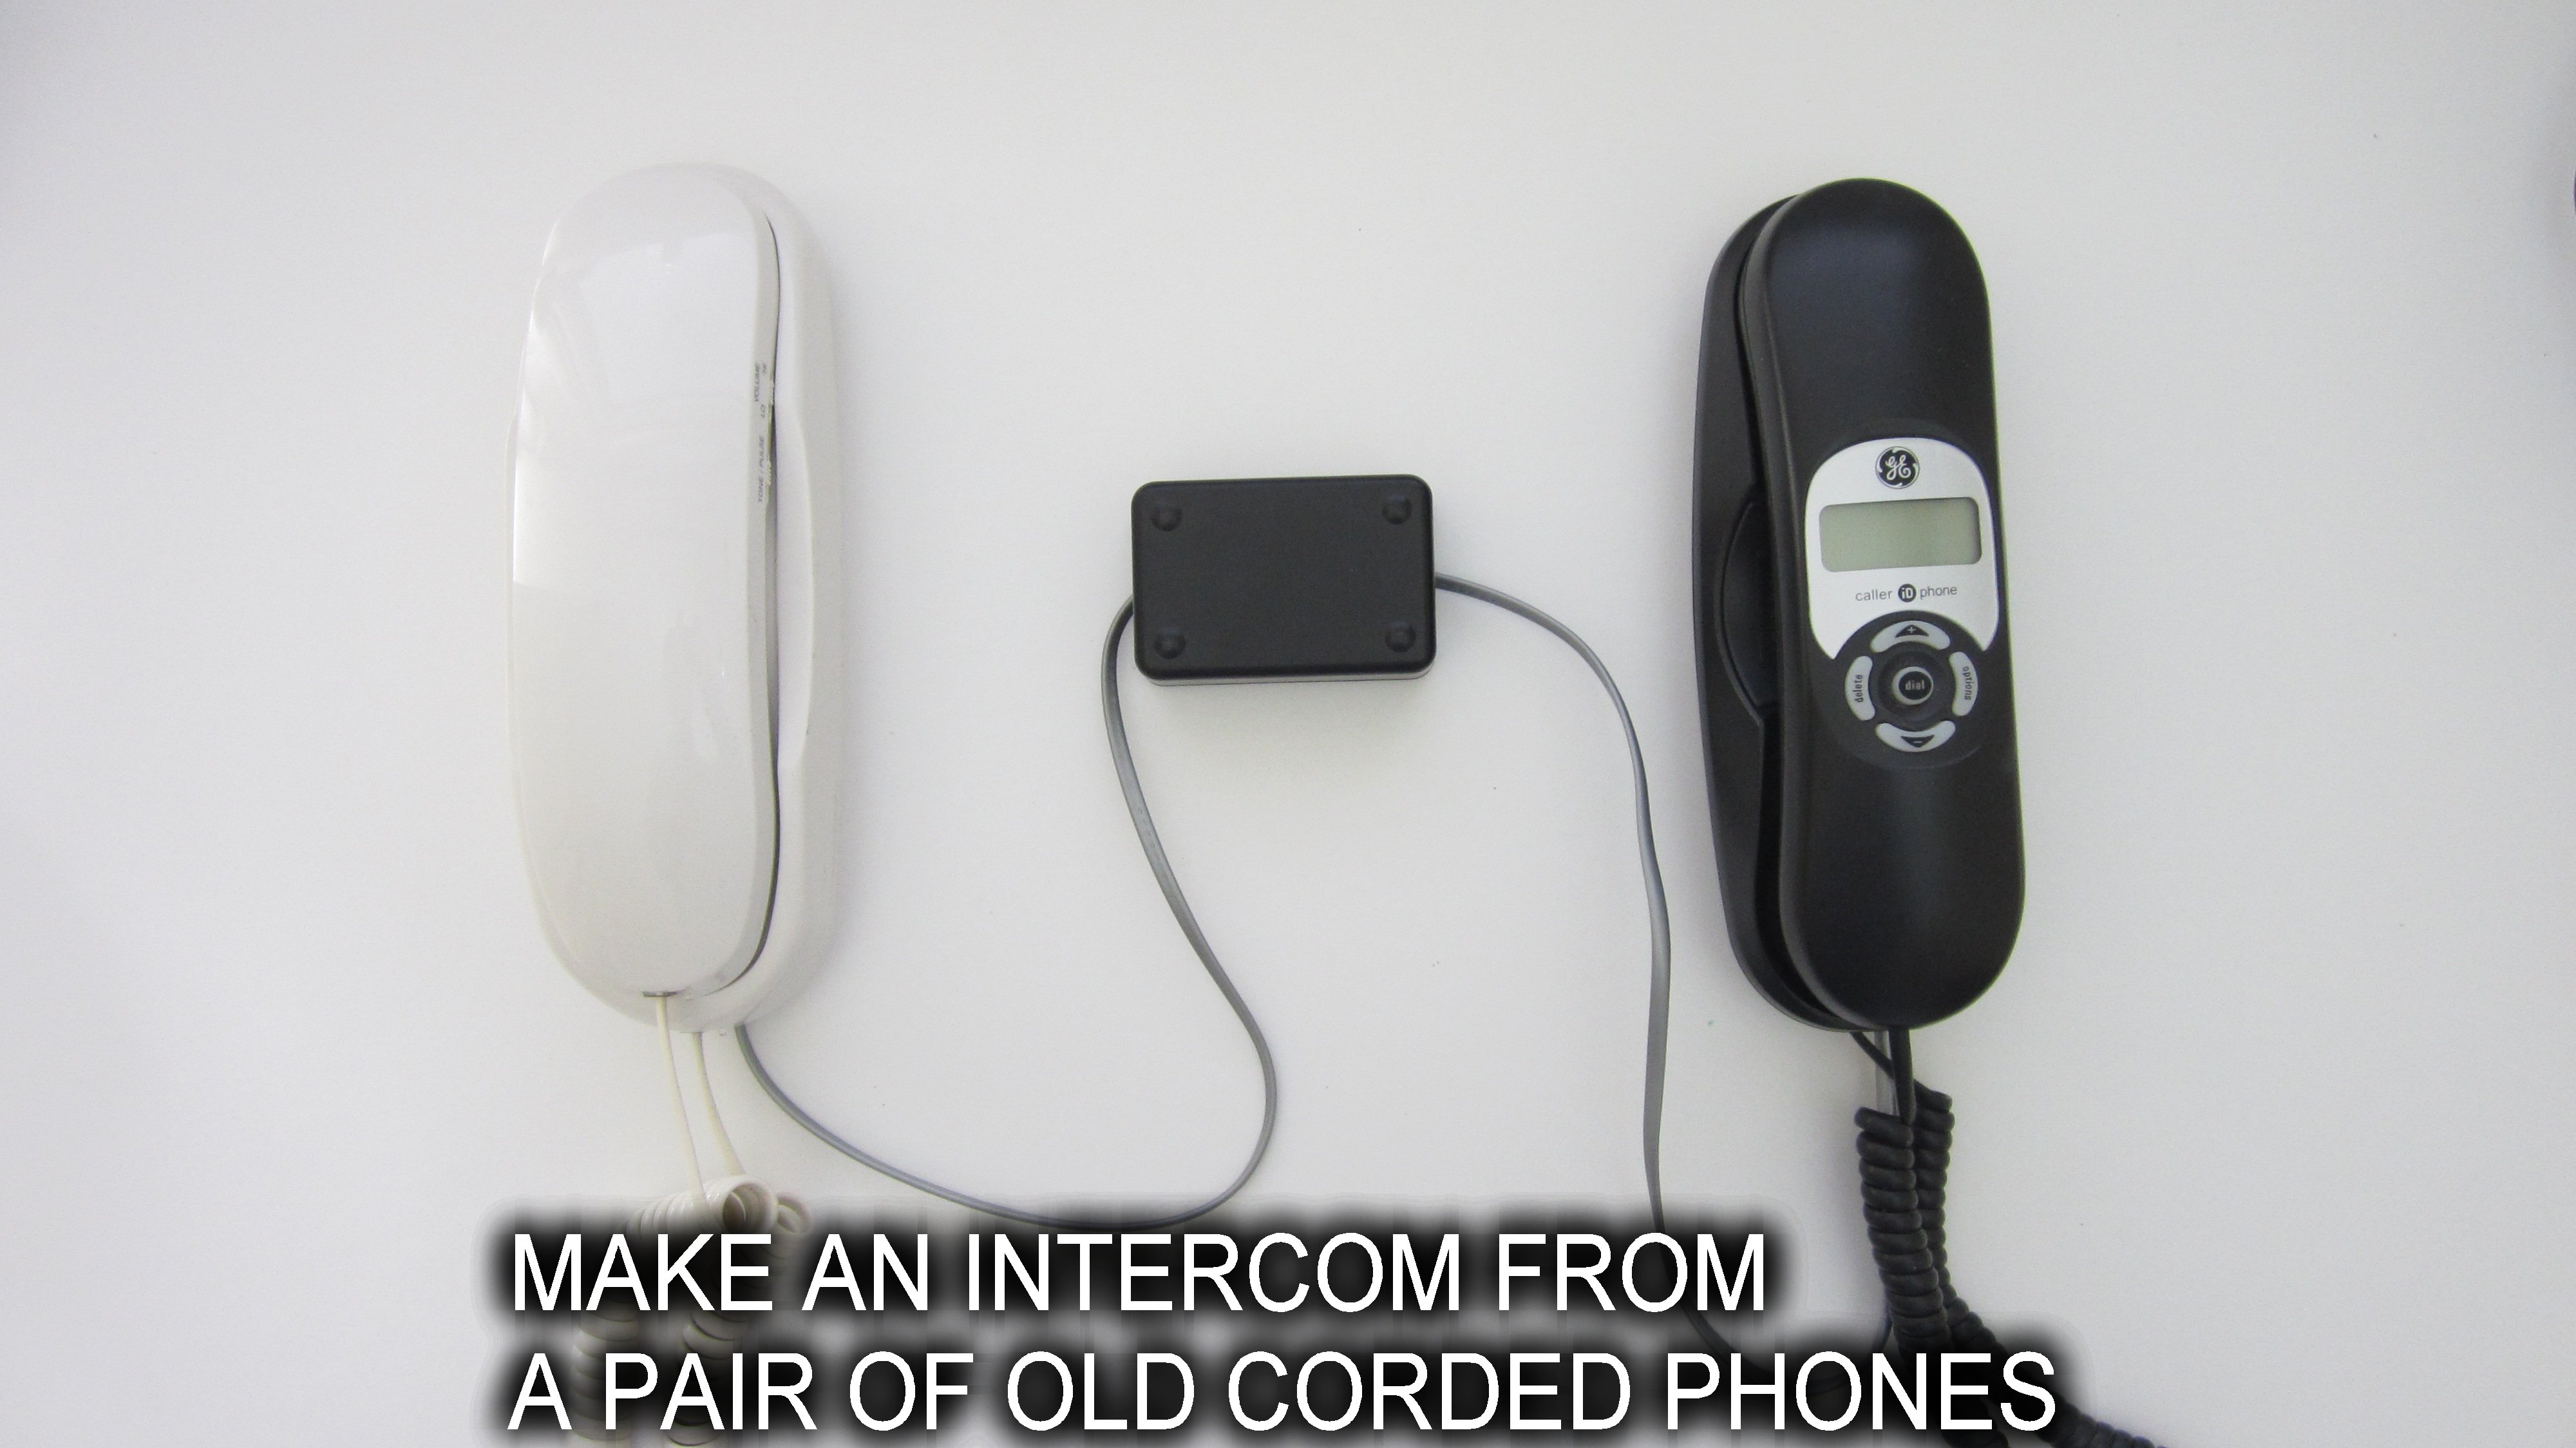 Simple Intercom From a Pair of Old Corded Phones